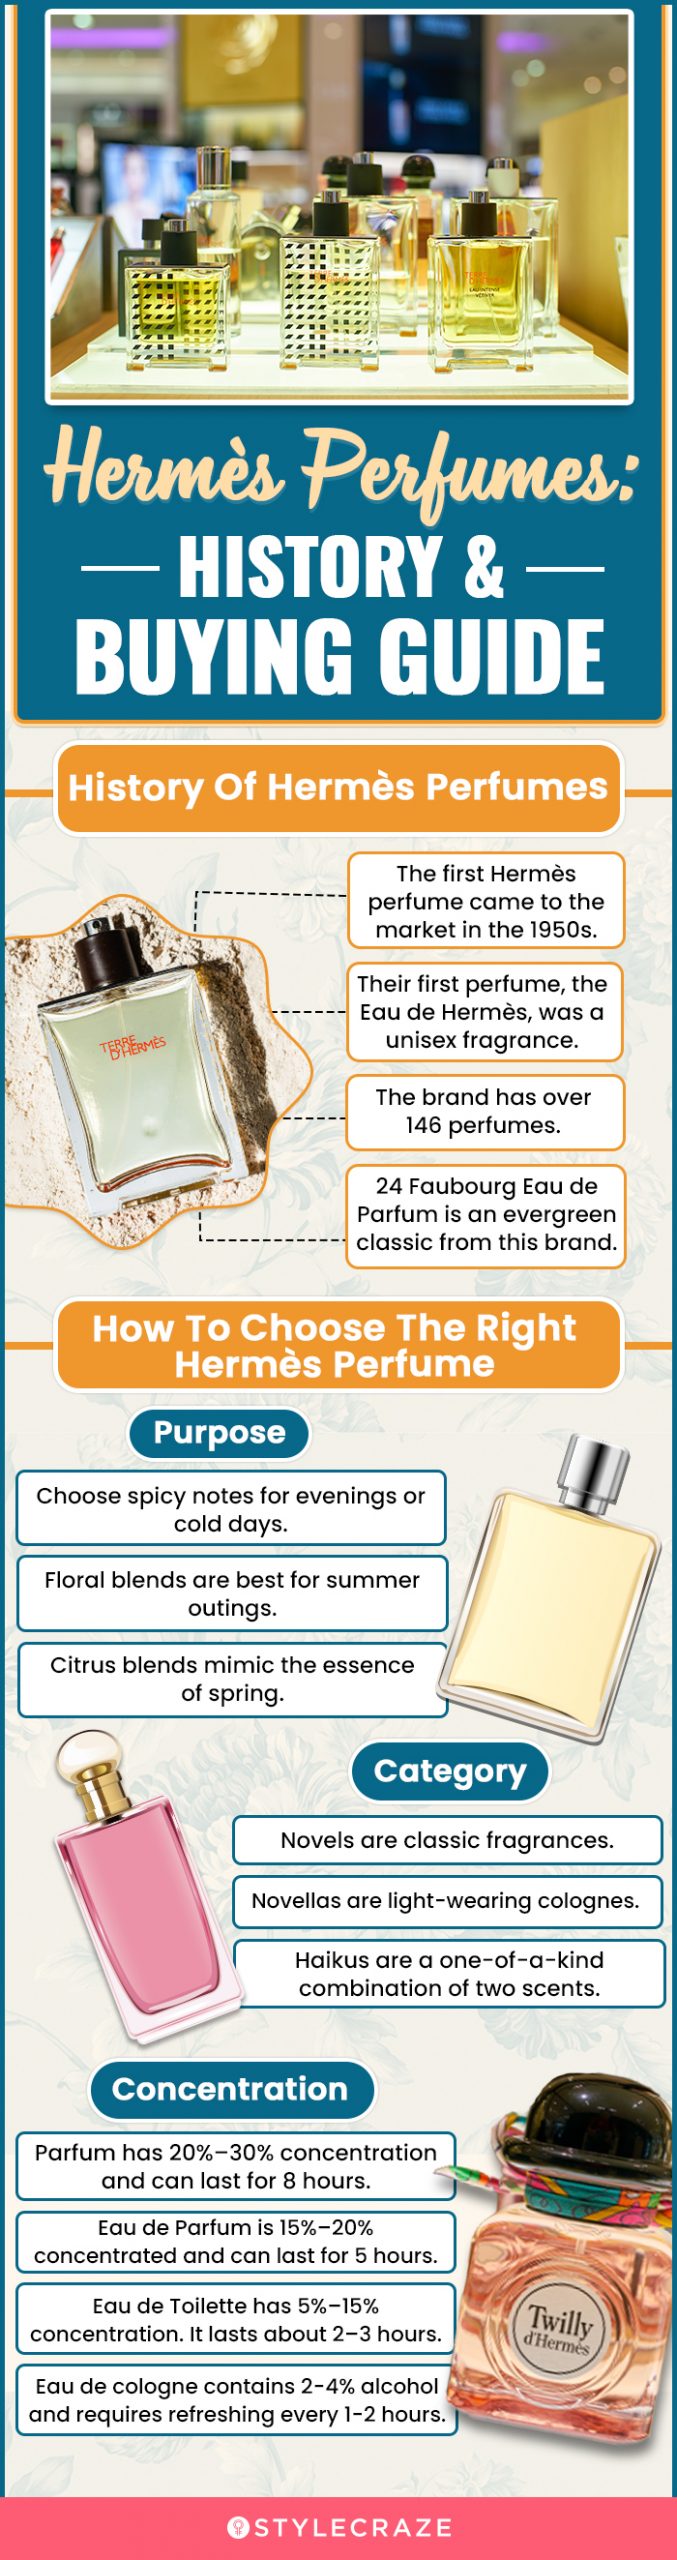 Hermès Perfumes: History & Buying Guide [infographic]